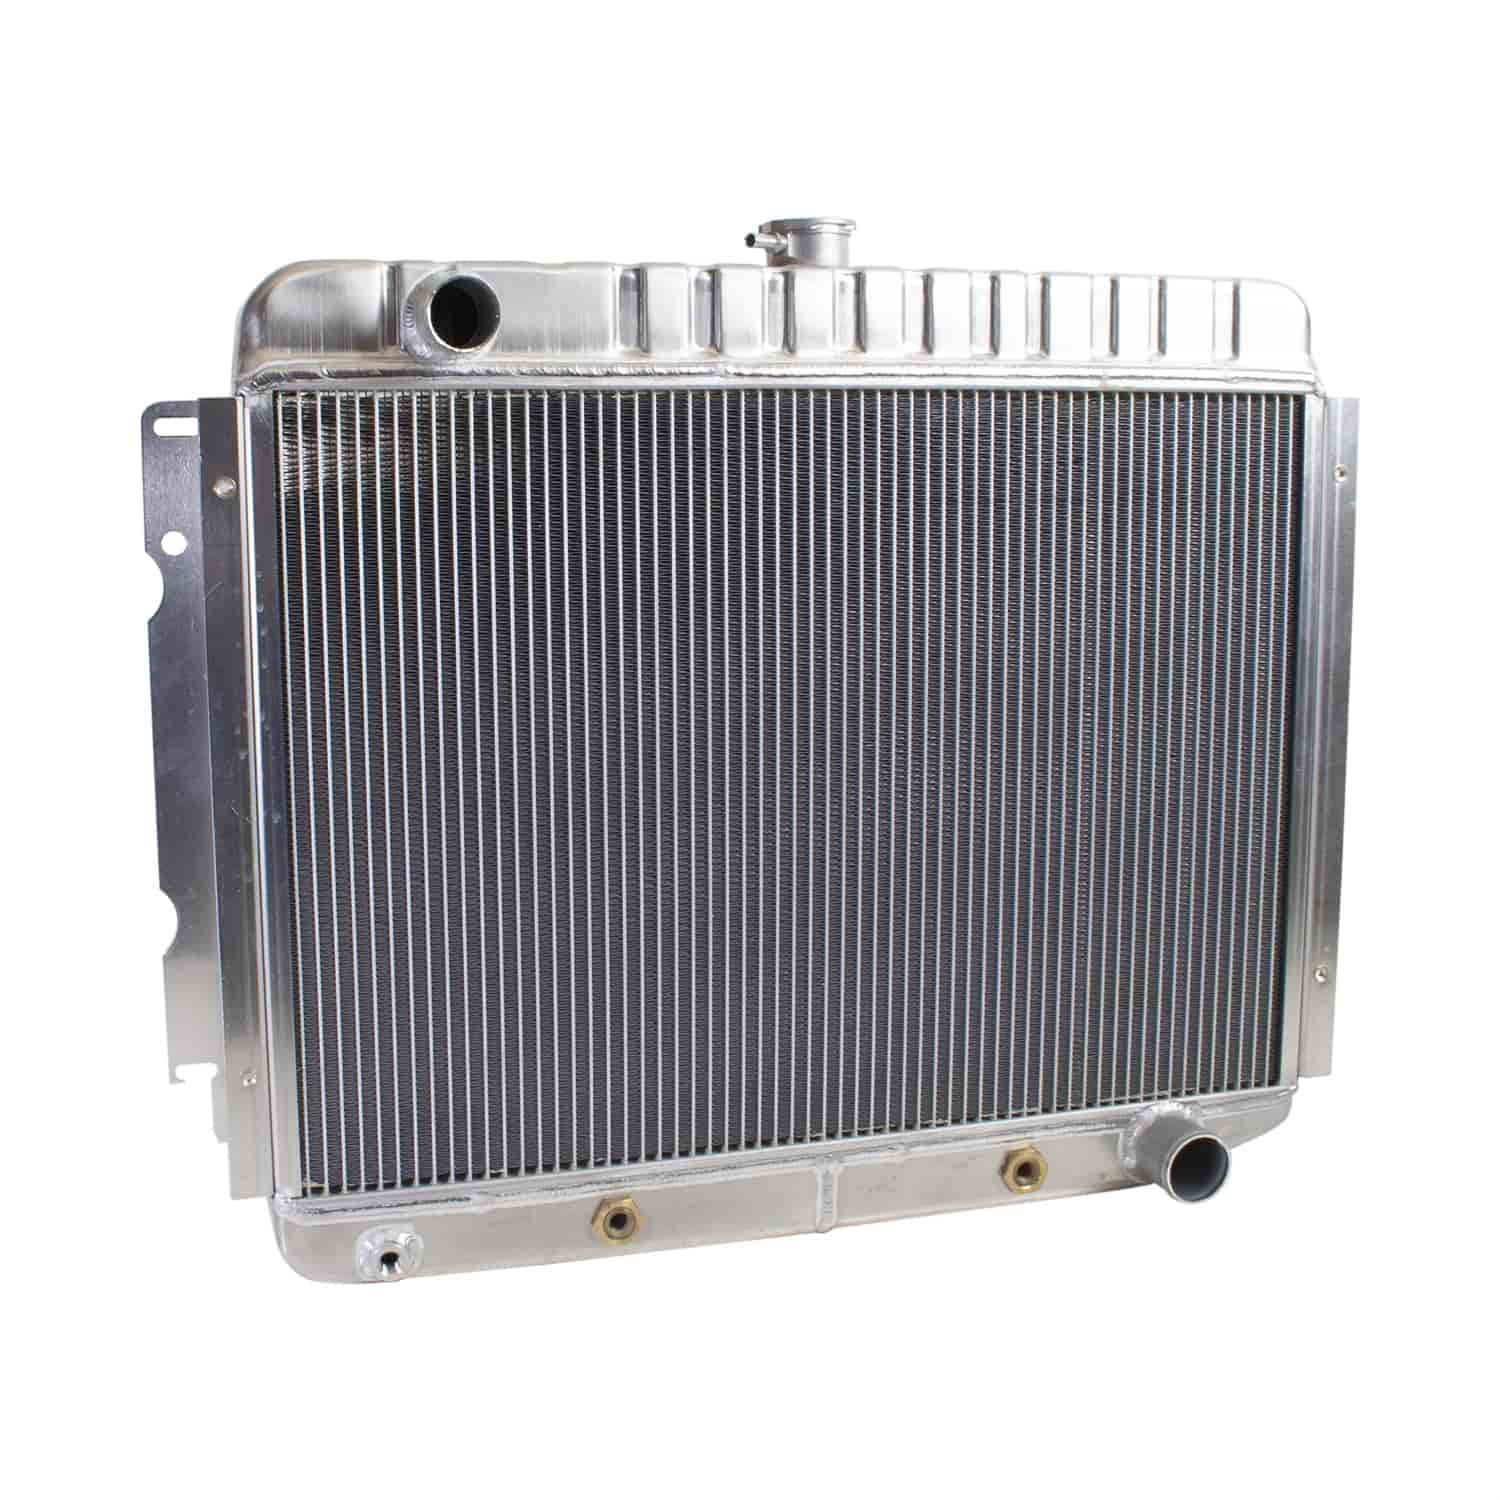 ExactFit Radiator for 1970-1974 Chrysler E Body Challenger/Barracuda with Small Block